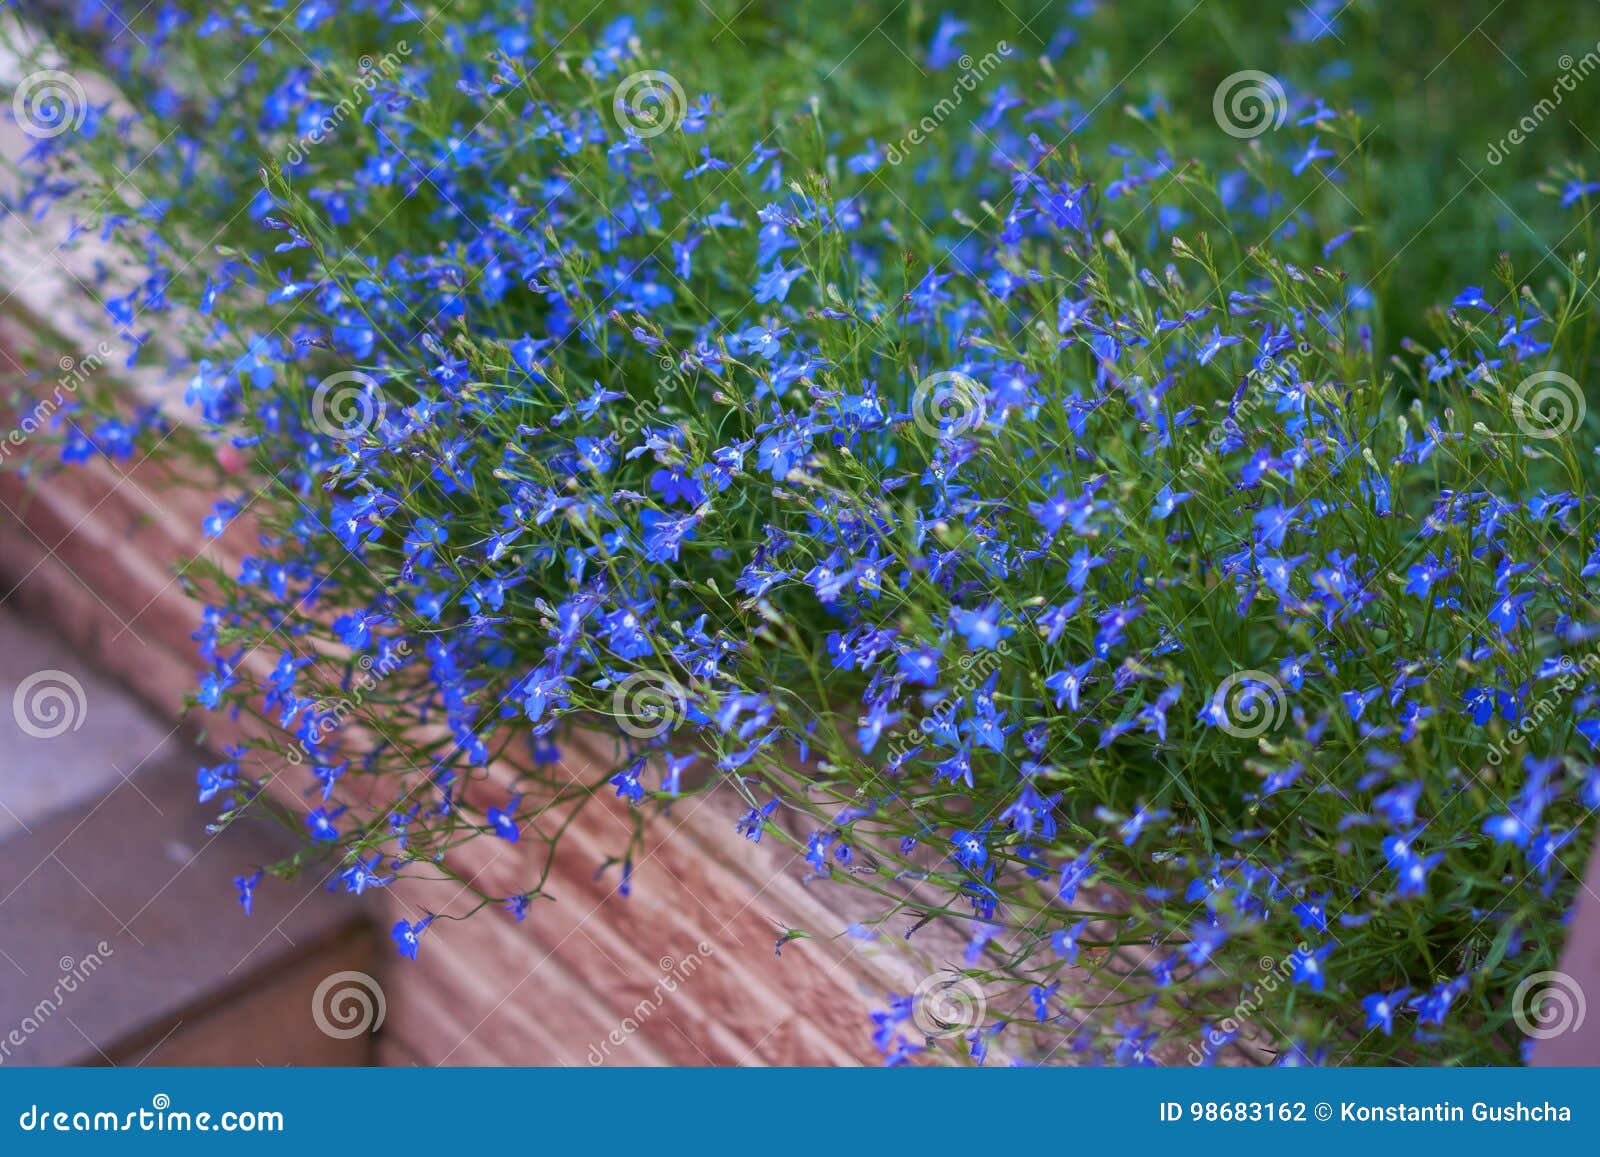 Blue flower bed in summer stock photo. Image of floral - 98683162